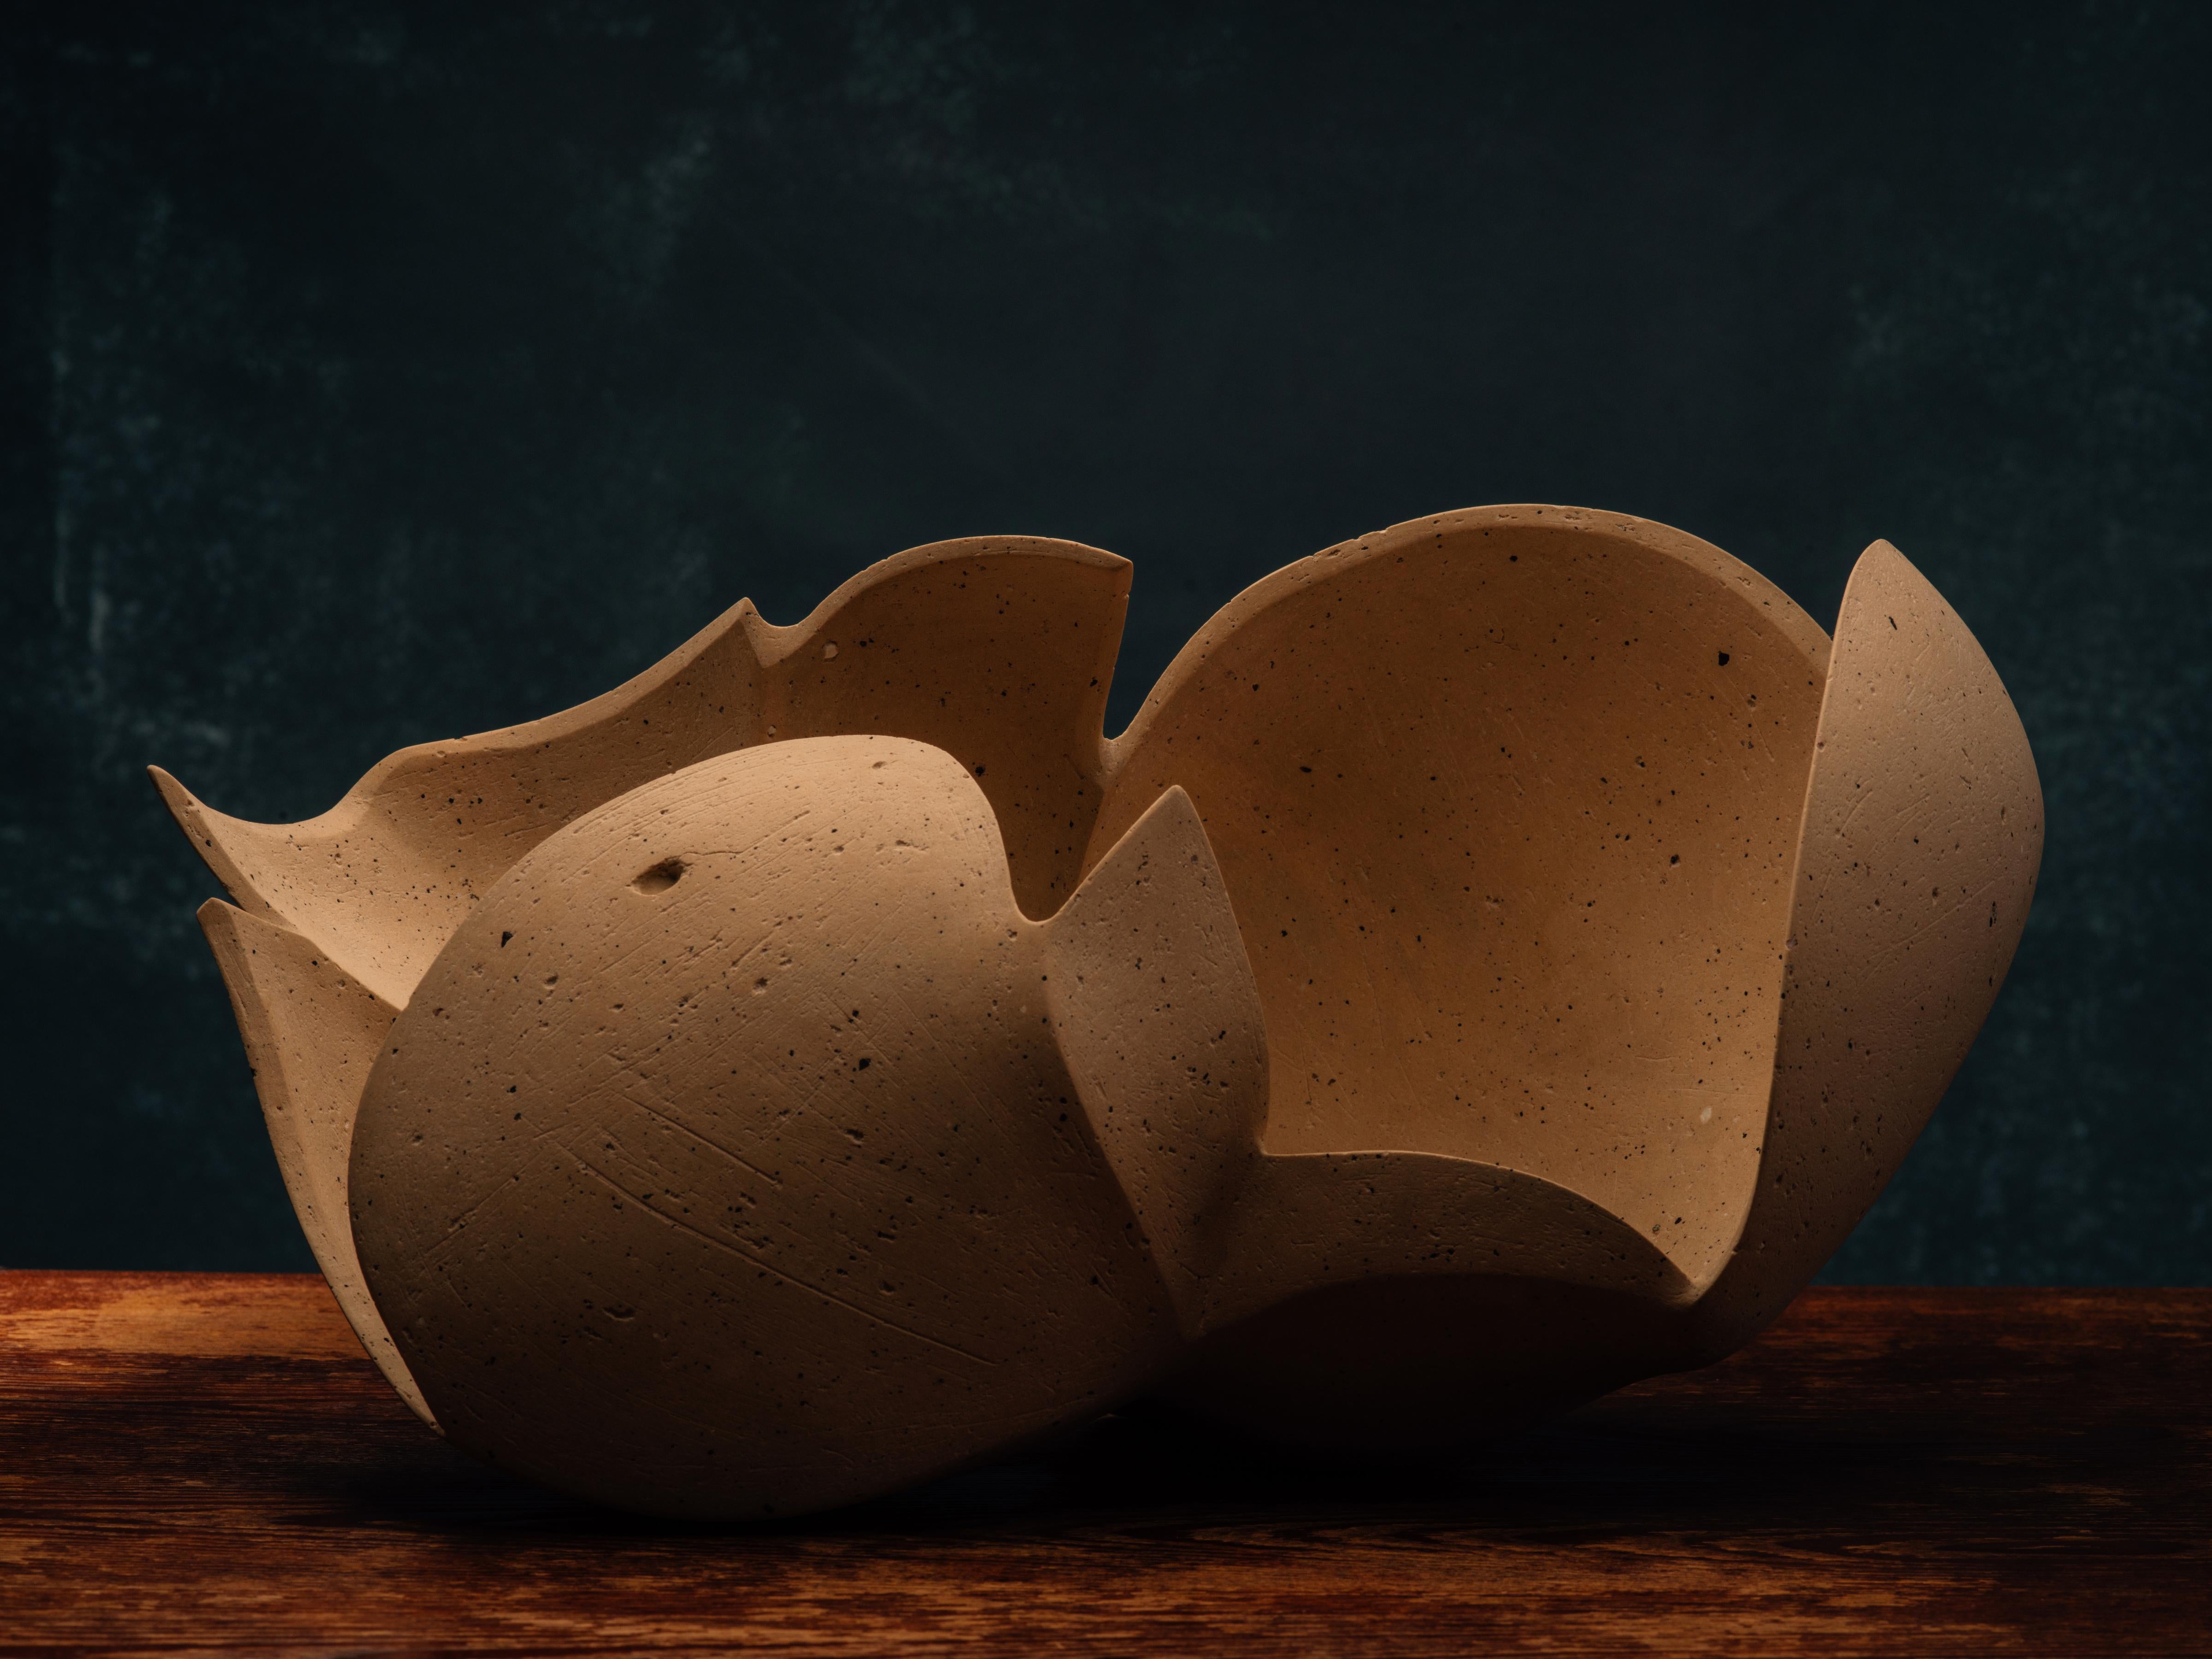 Title: Perianth 07 
Year: 2021

Freeform ceramic sculpture made from a blend of porcelaneous and stoneware clays hand-collected by the artist in Minnesota. Its surface is hand-polished with diamond sandpaper to render a matte finish. Signed with the